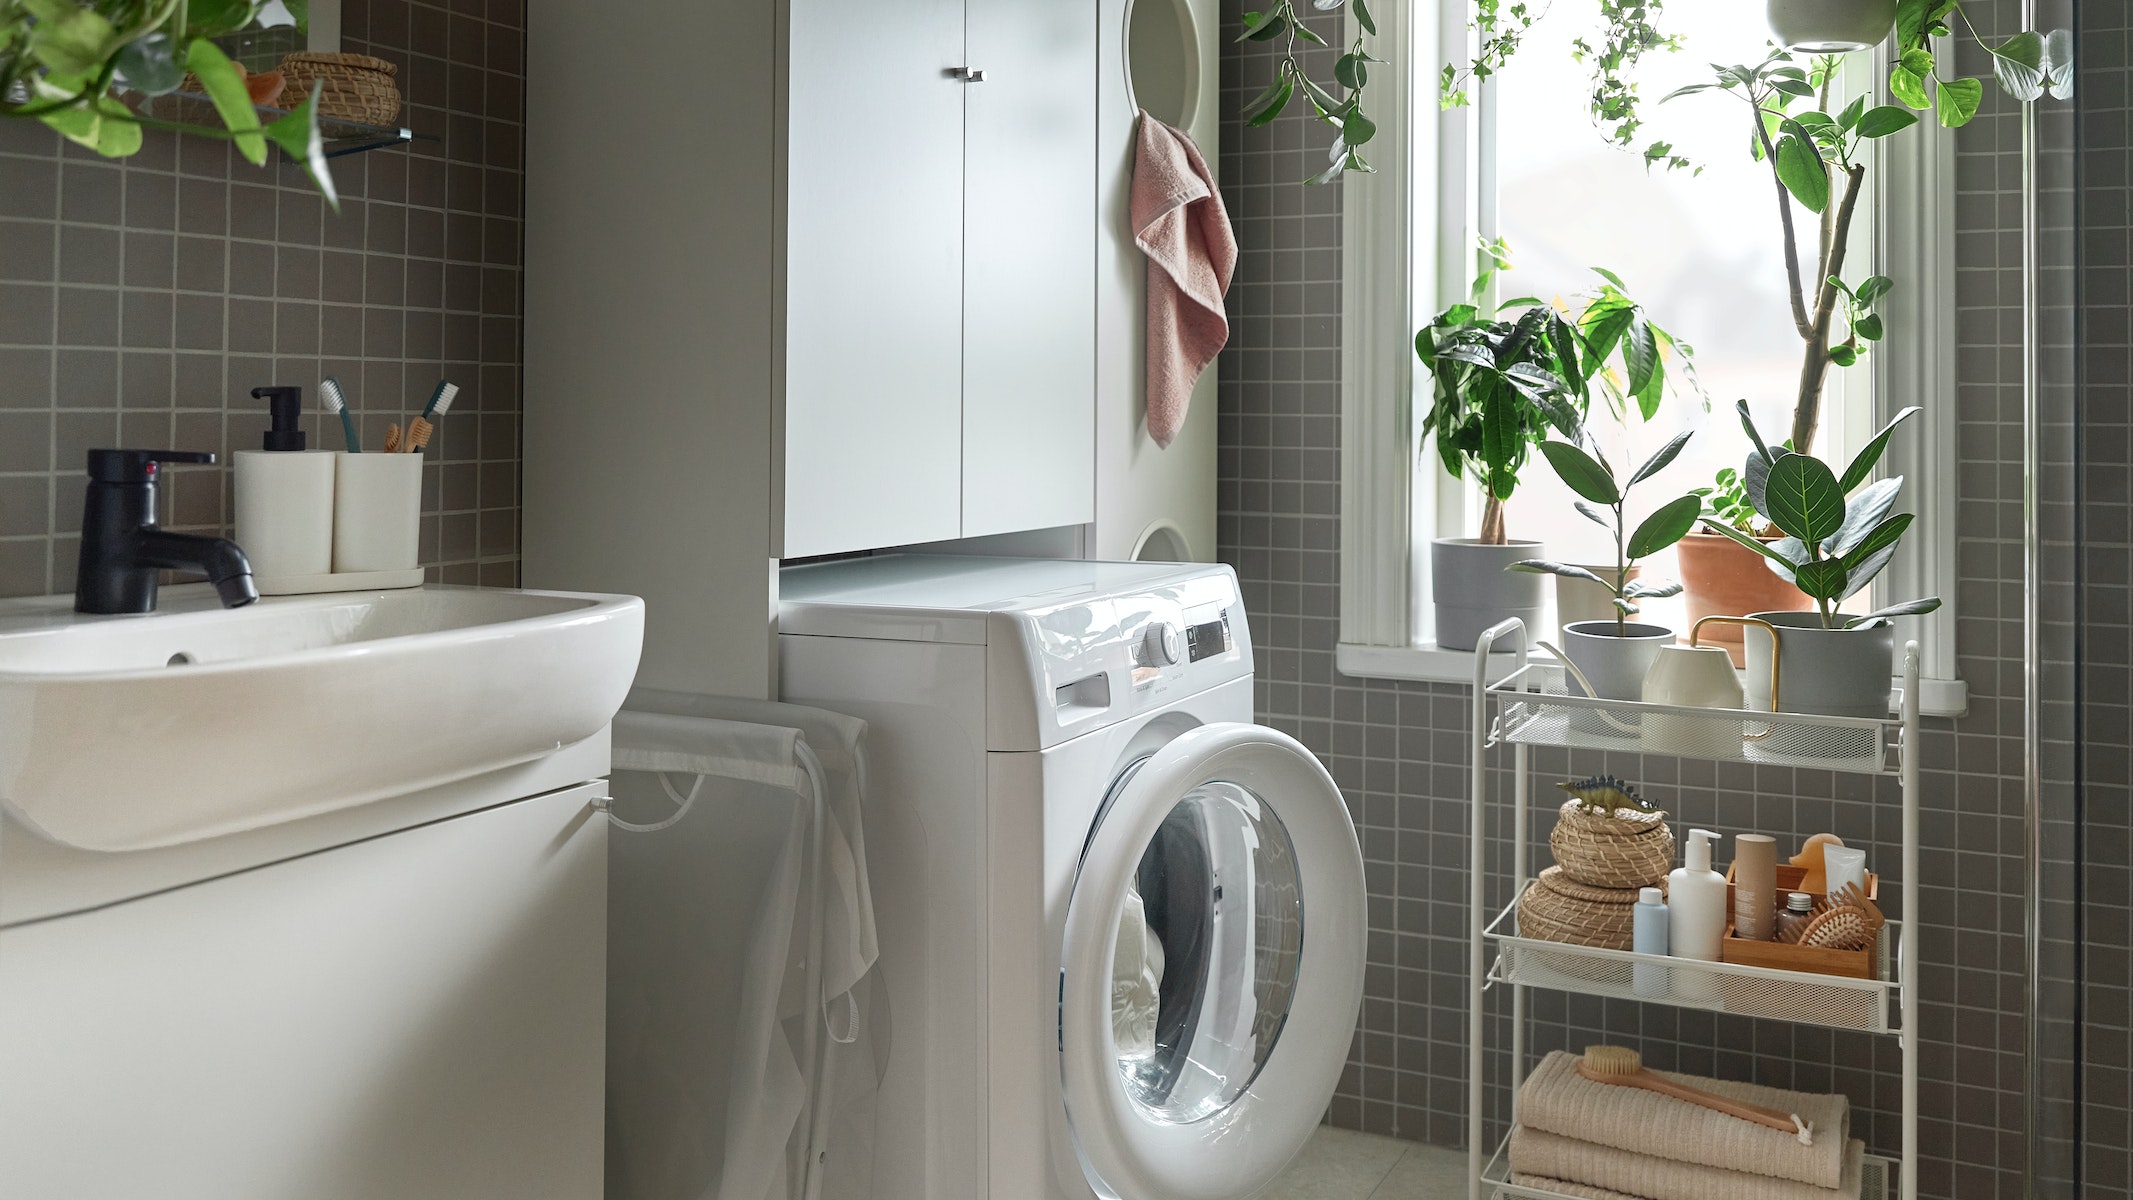 IKEA - Compact laundry functionality with freshness for a small bathroom